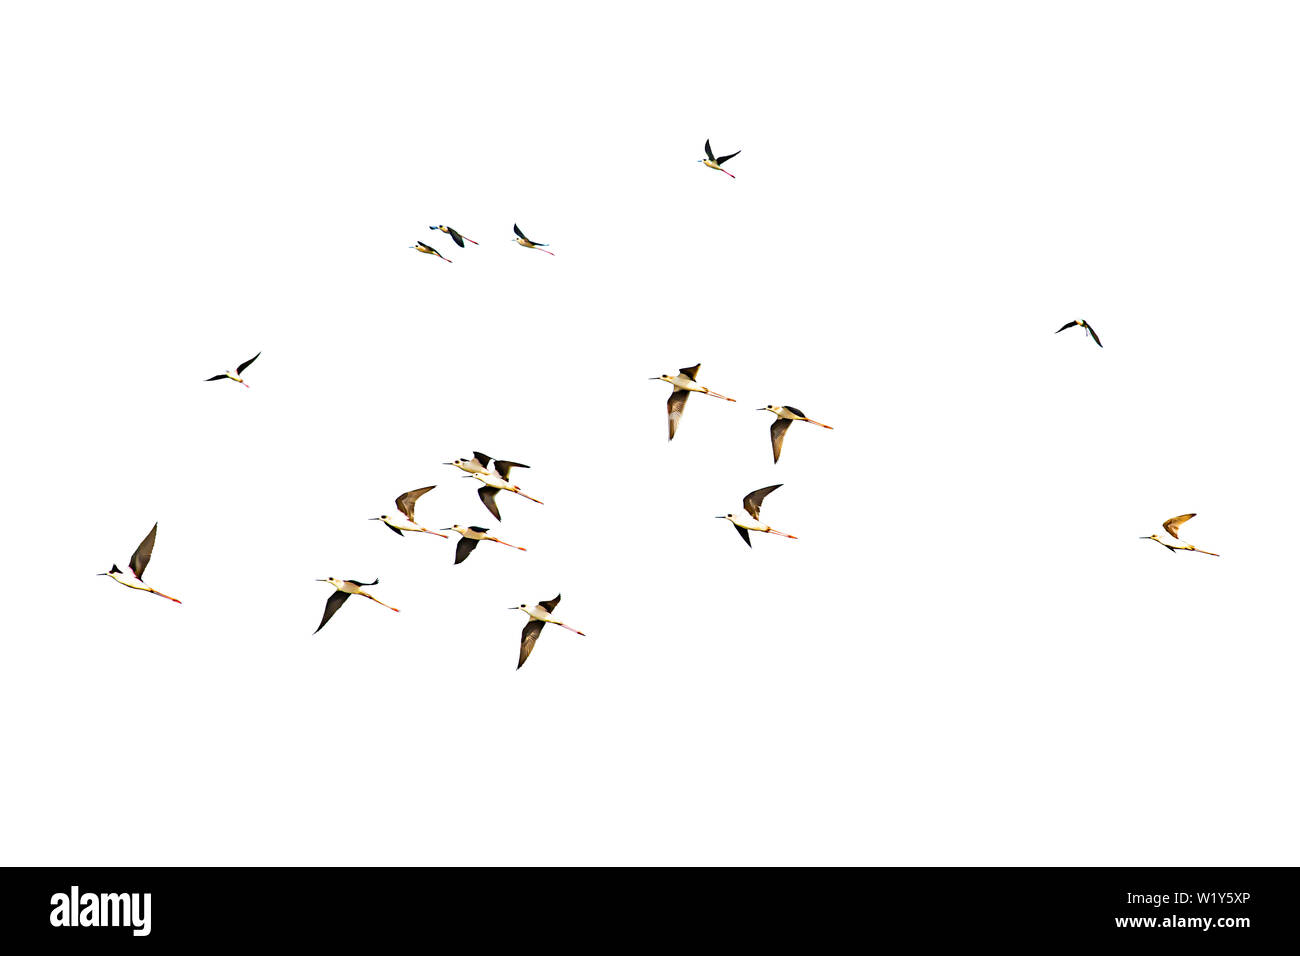 Isolated Flocks of birds flying on a white background with clipping path. Stock Photo